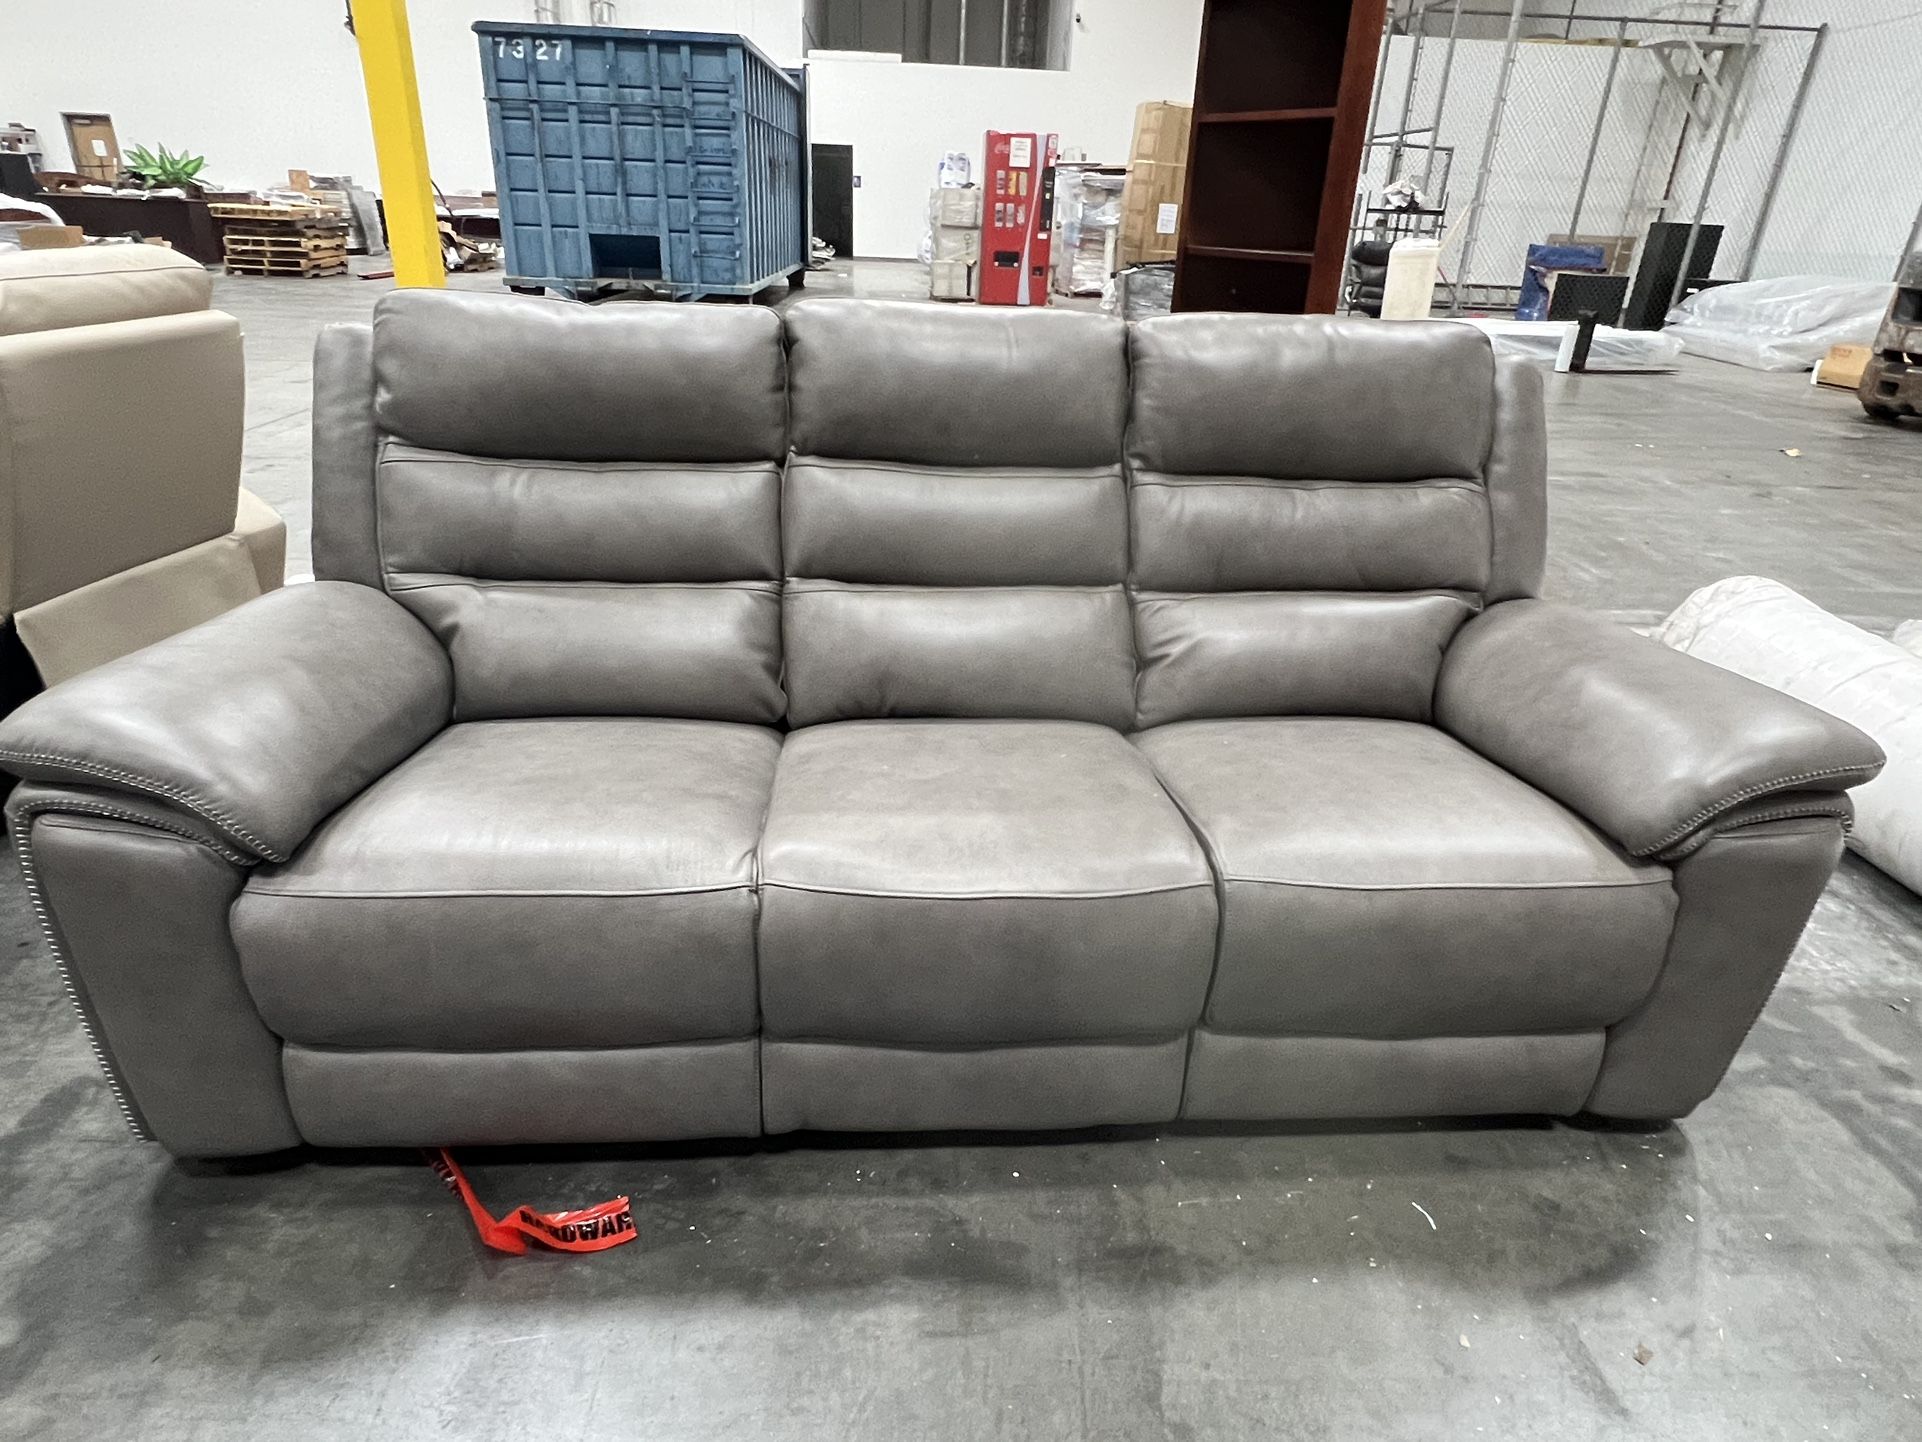 Italian Leather Grey Sofa Couch Loveseat Chair